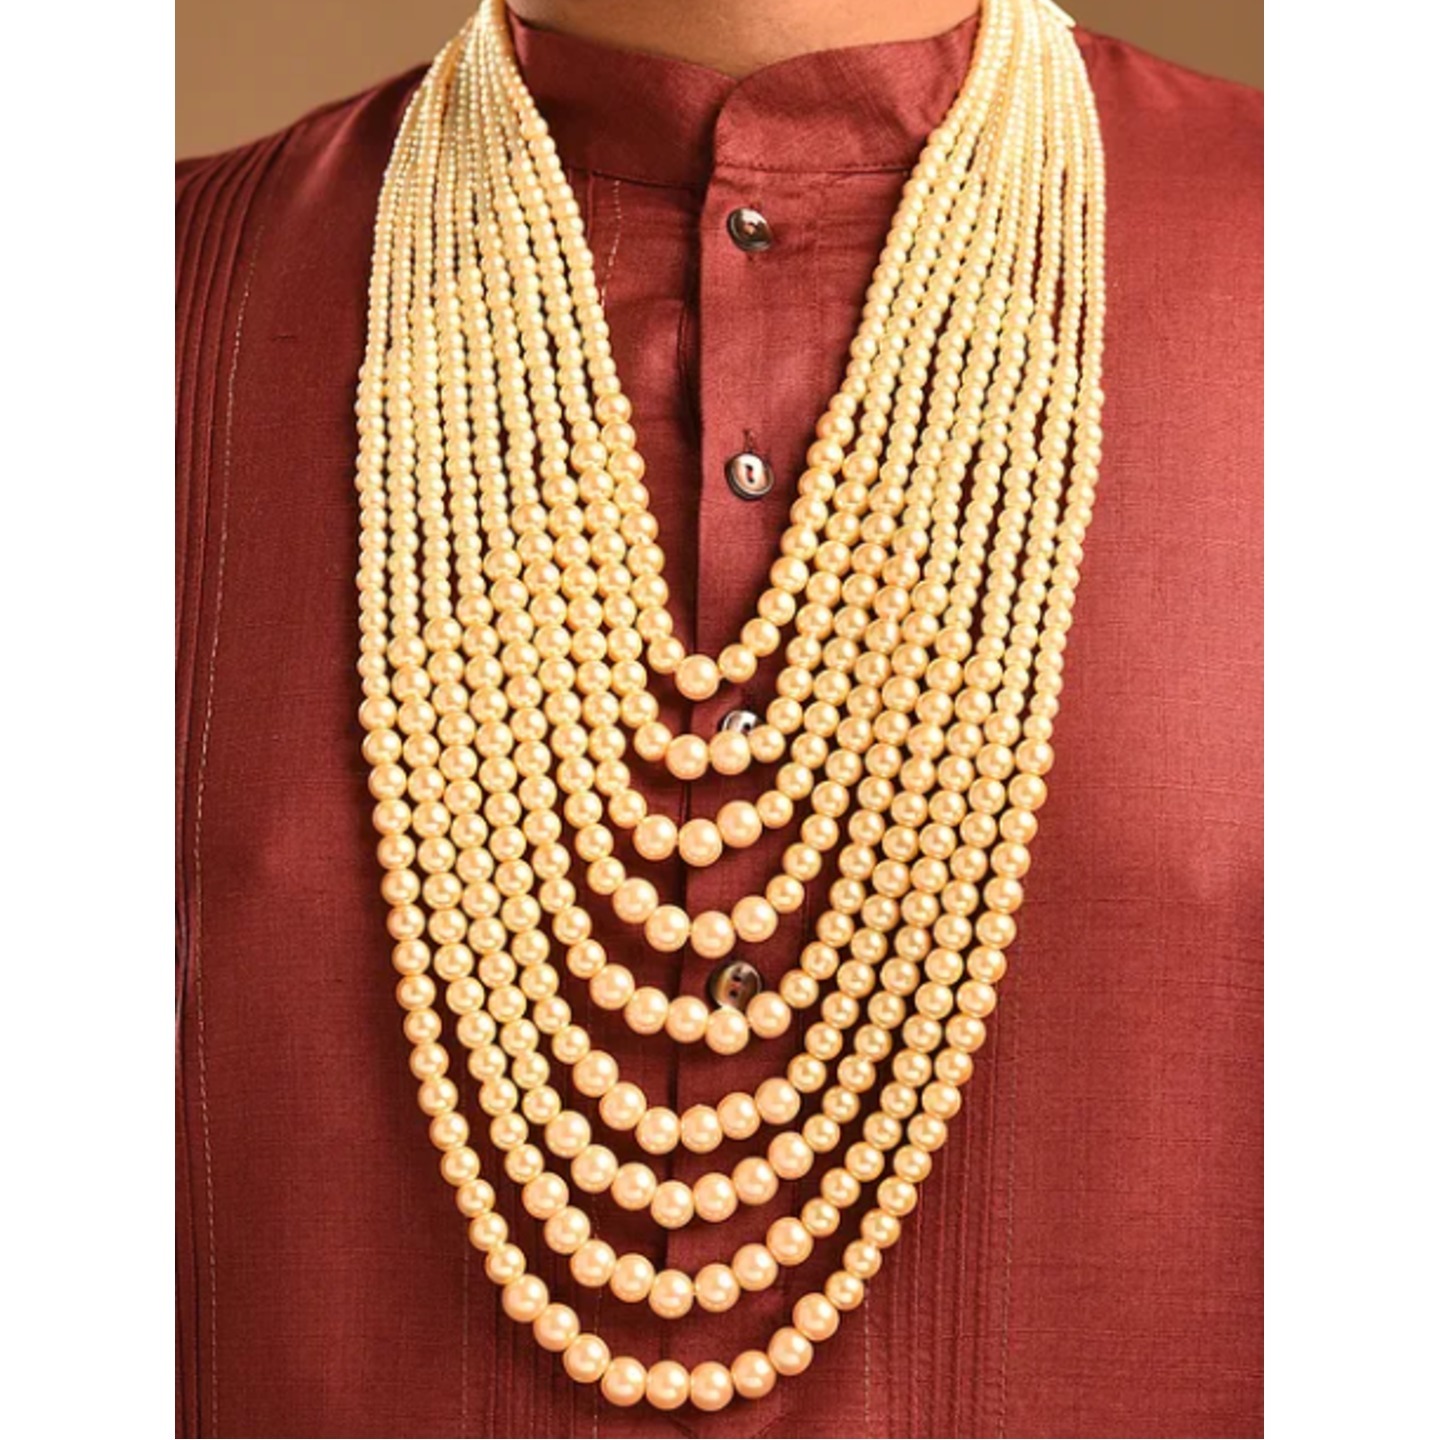 White Pearls Beaded Layered Necklace For Men